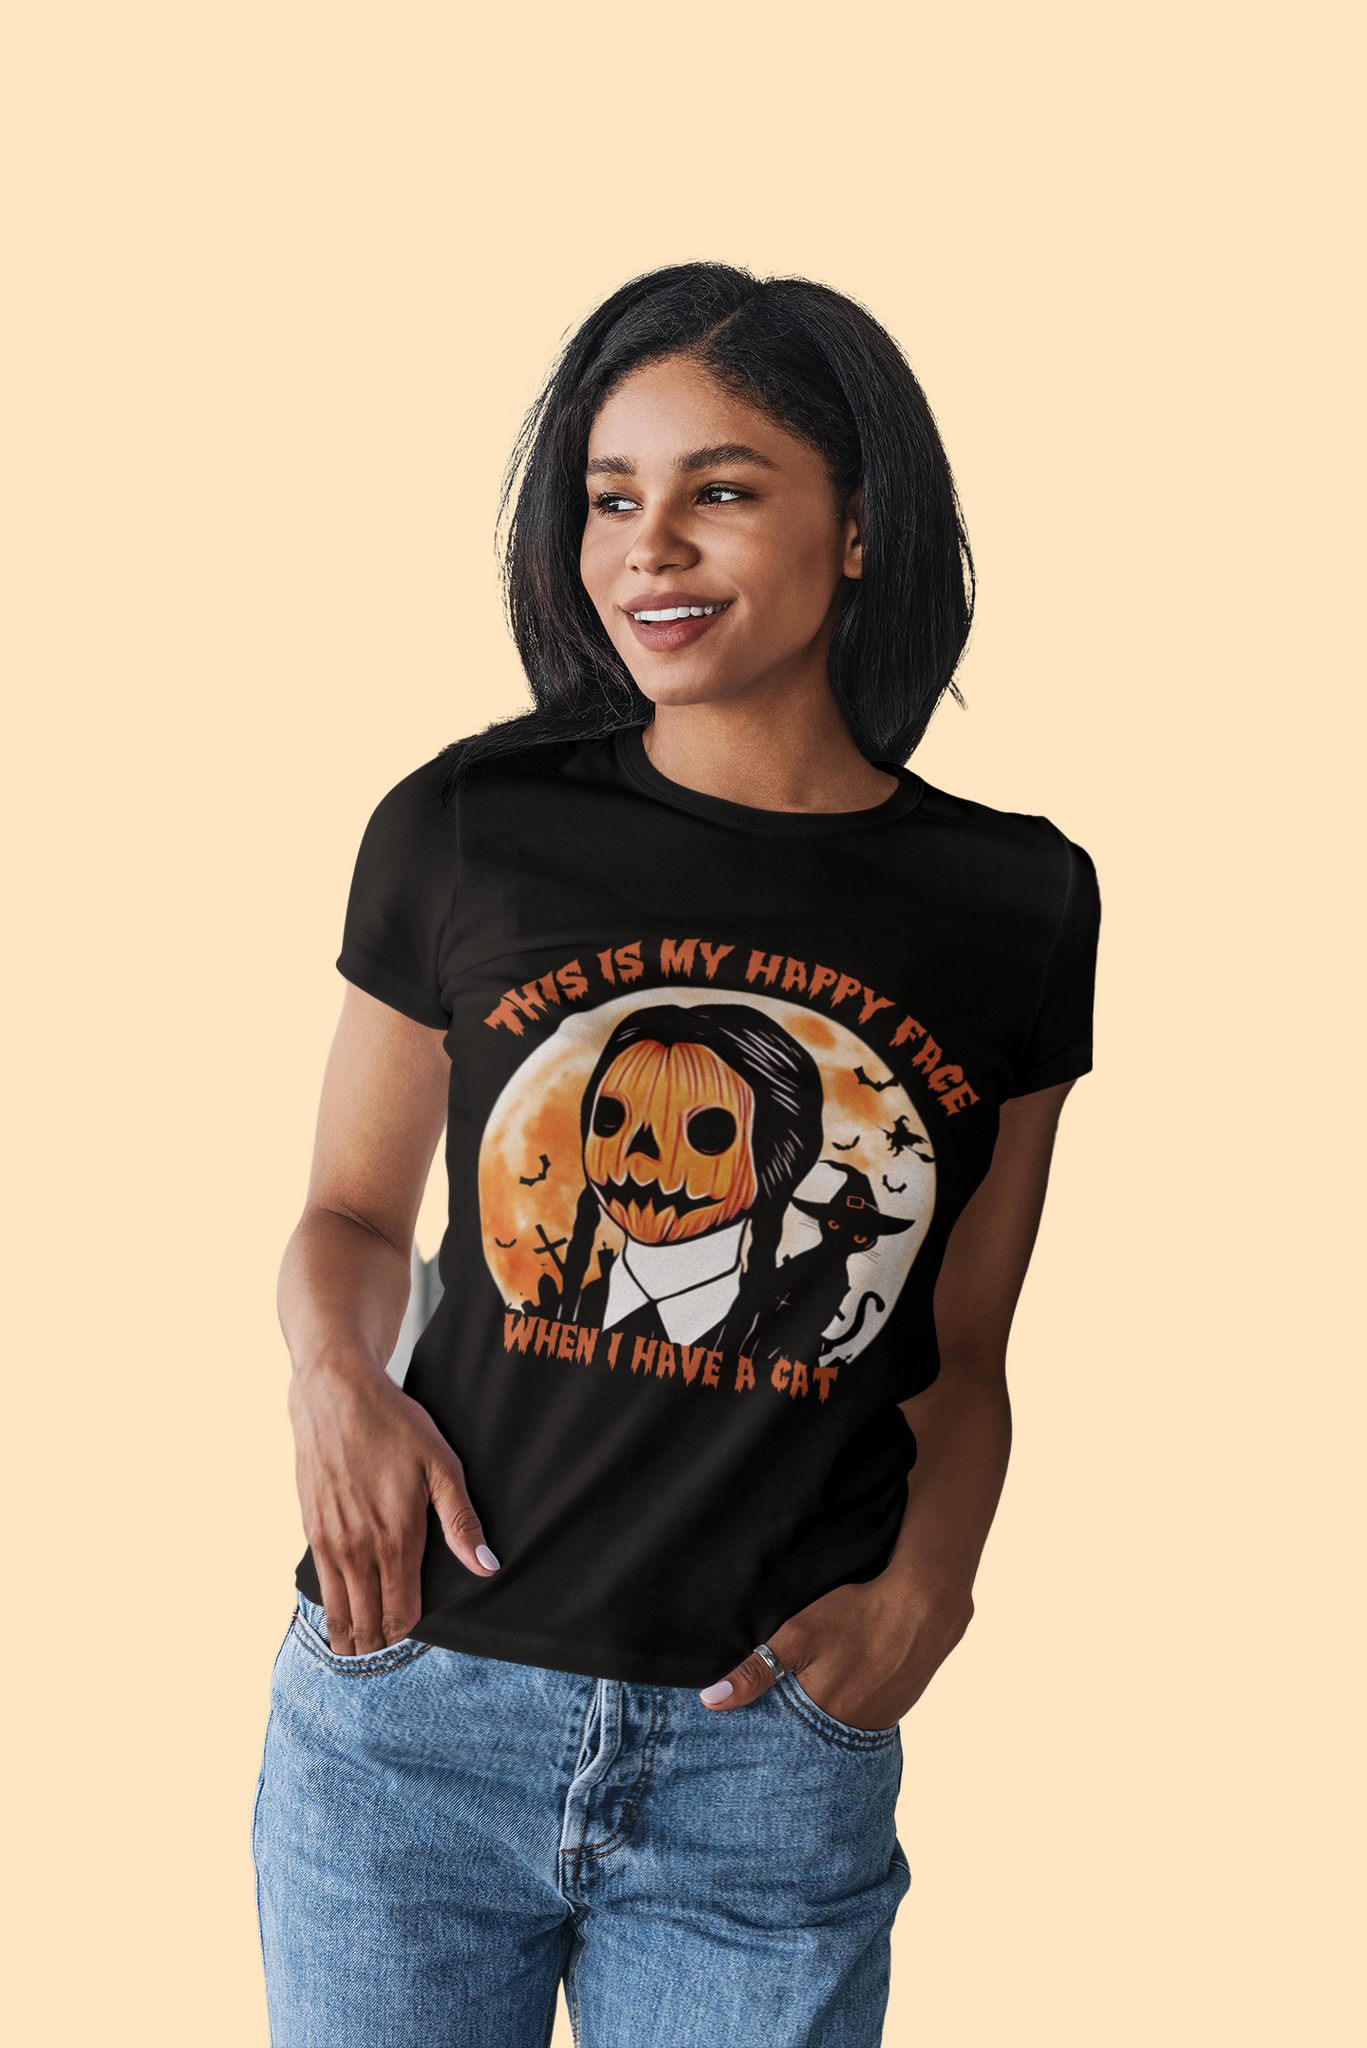 Addams Family T Shirt, Wednesday Addams T Shirt, This Is My Happy Face When I Have A Cat Tshirt, Halloween Gifts